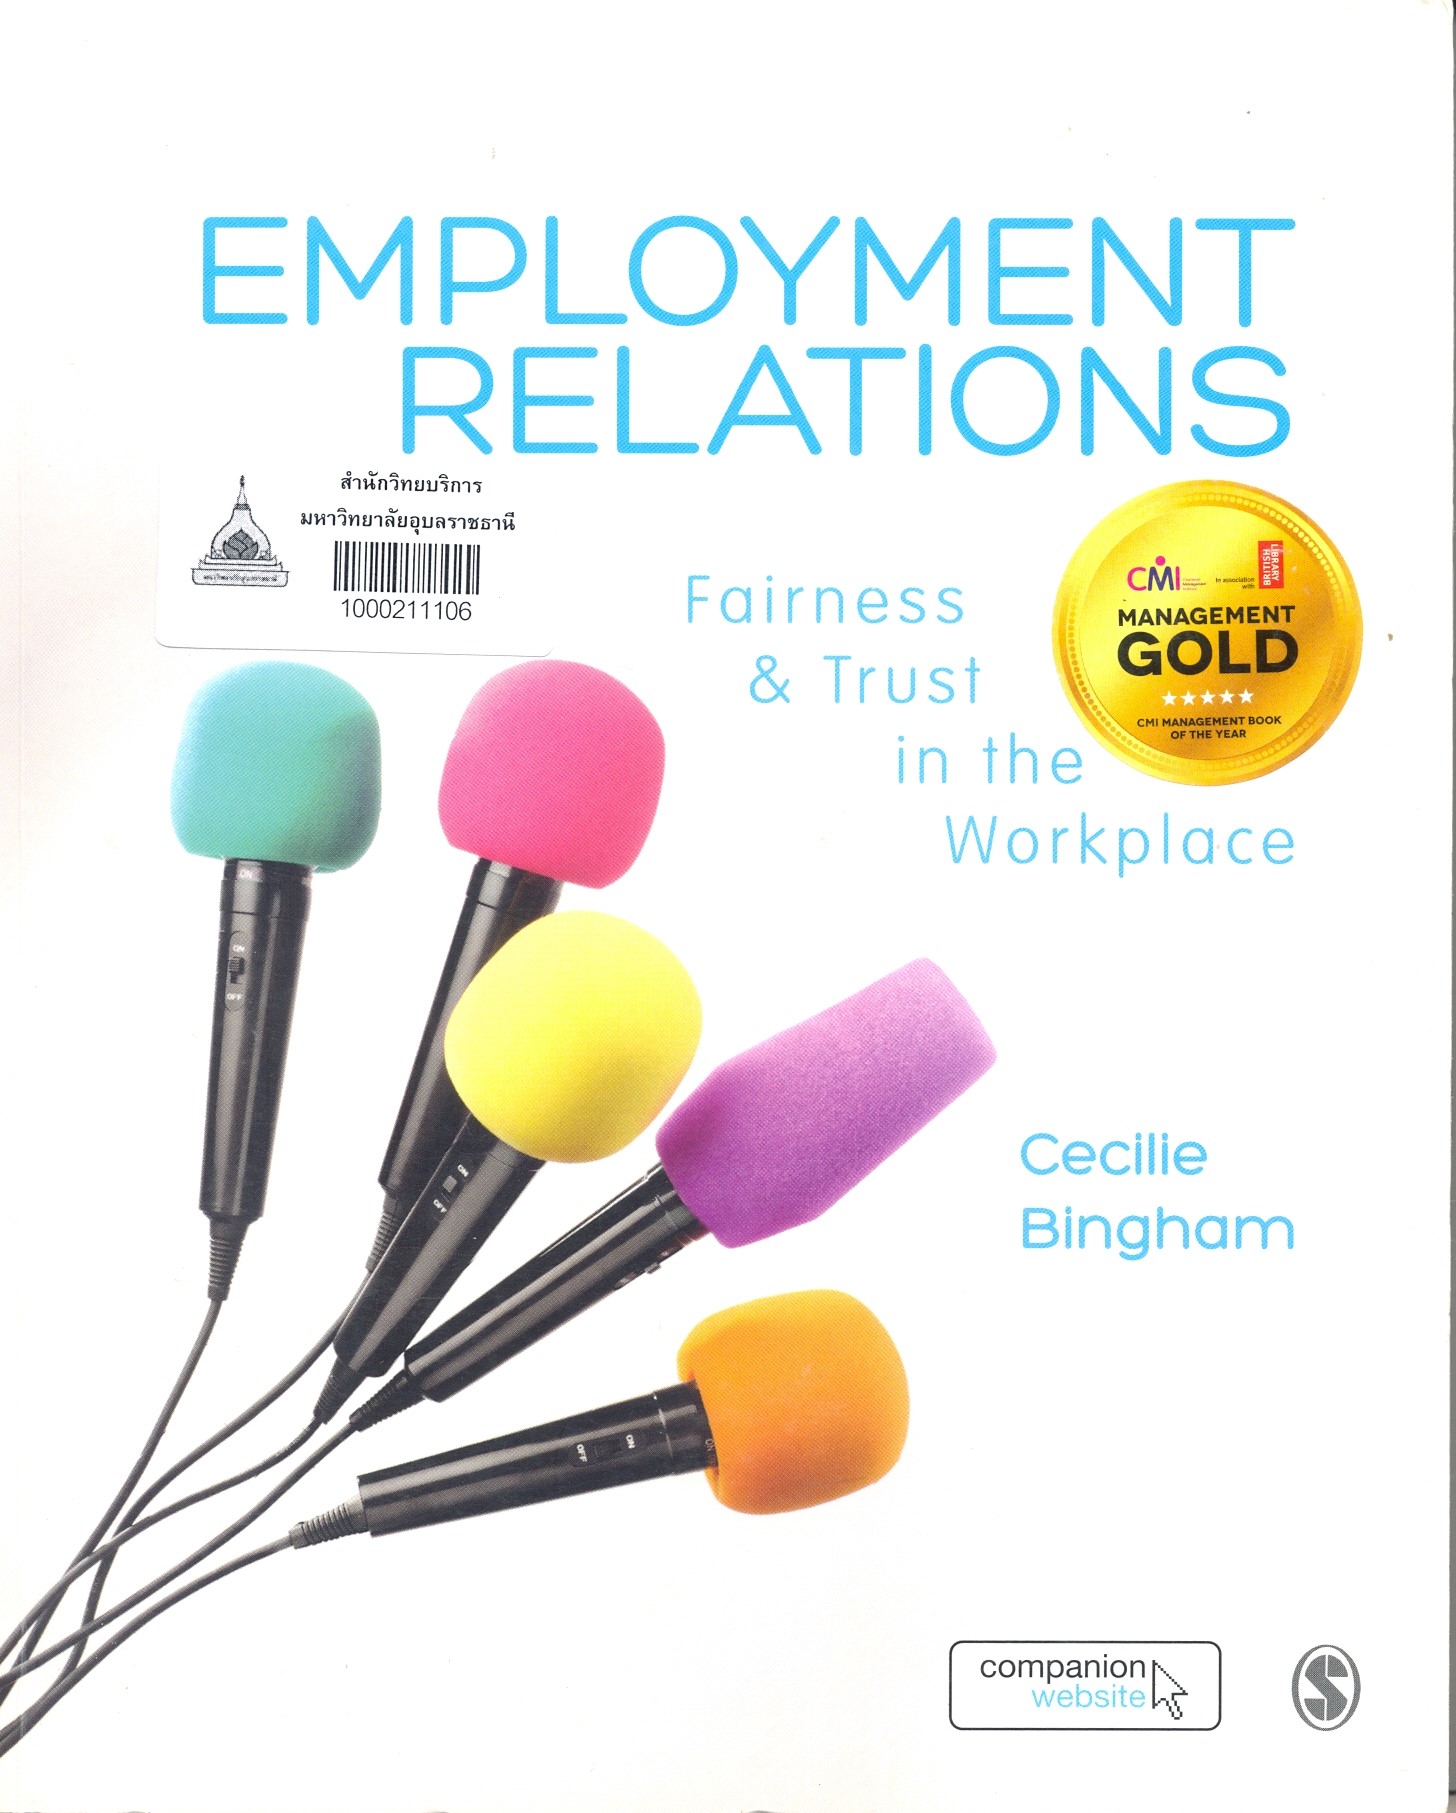 Employment relations : fairness & trust in the workplace